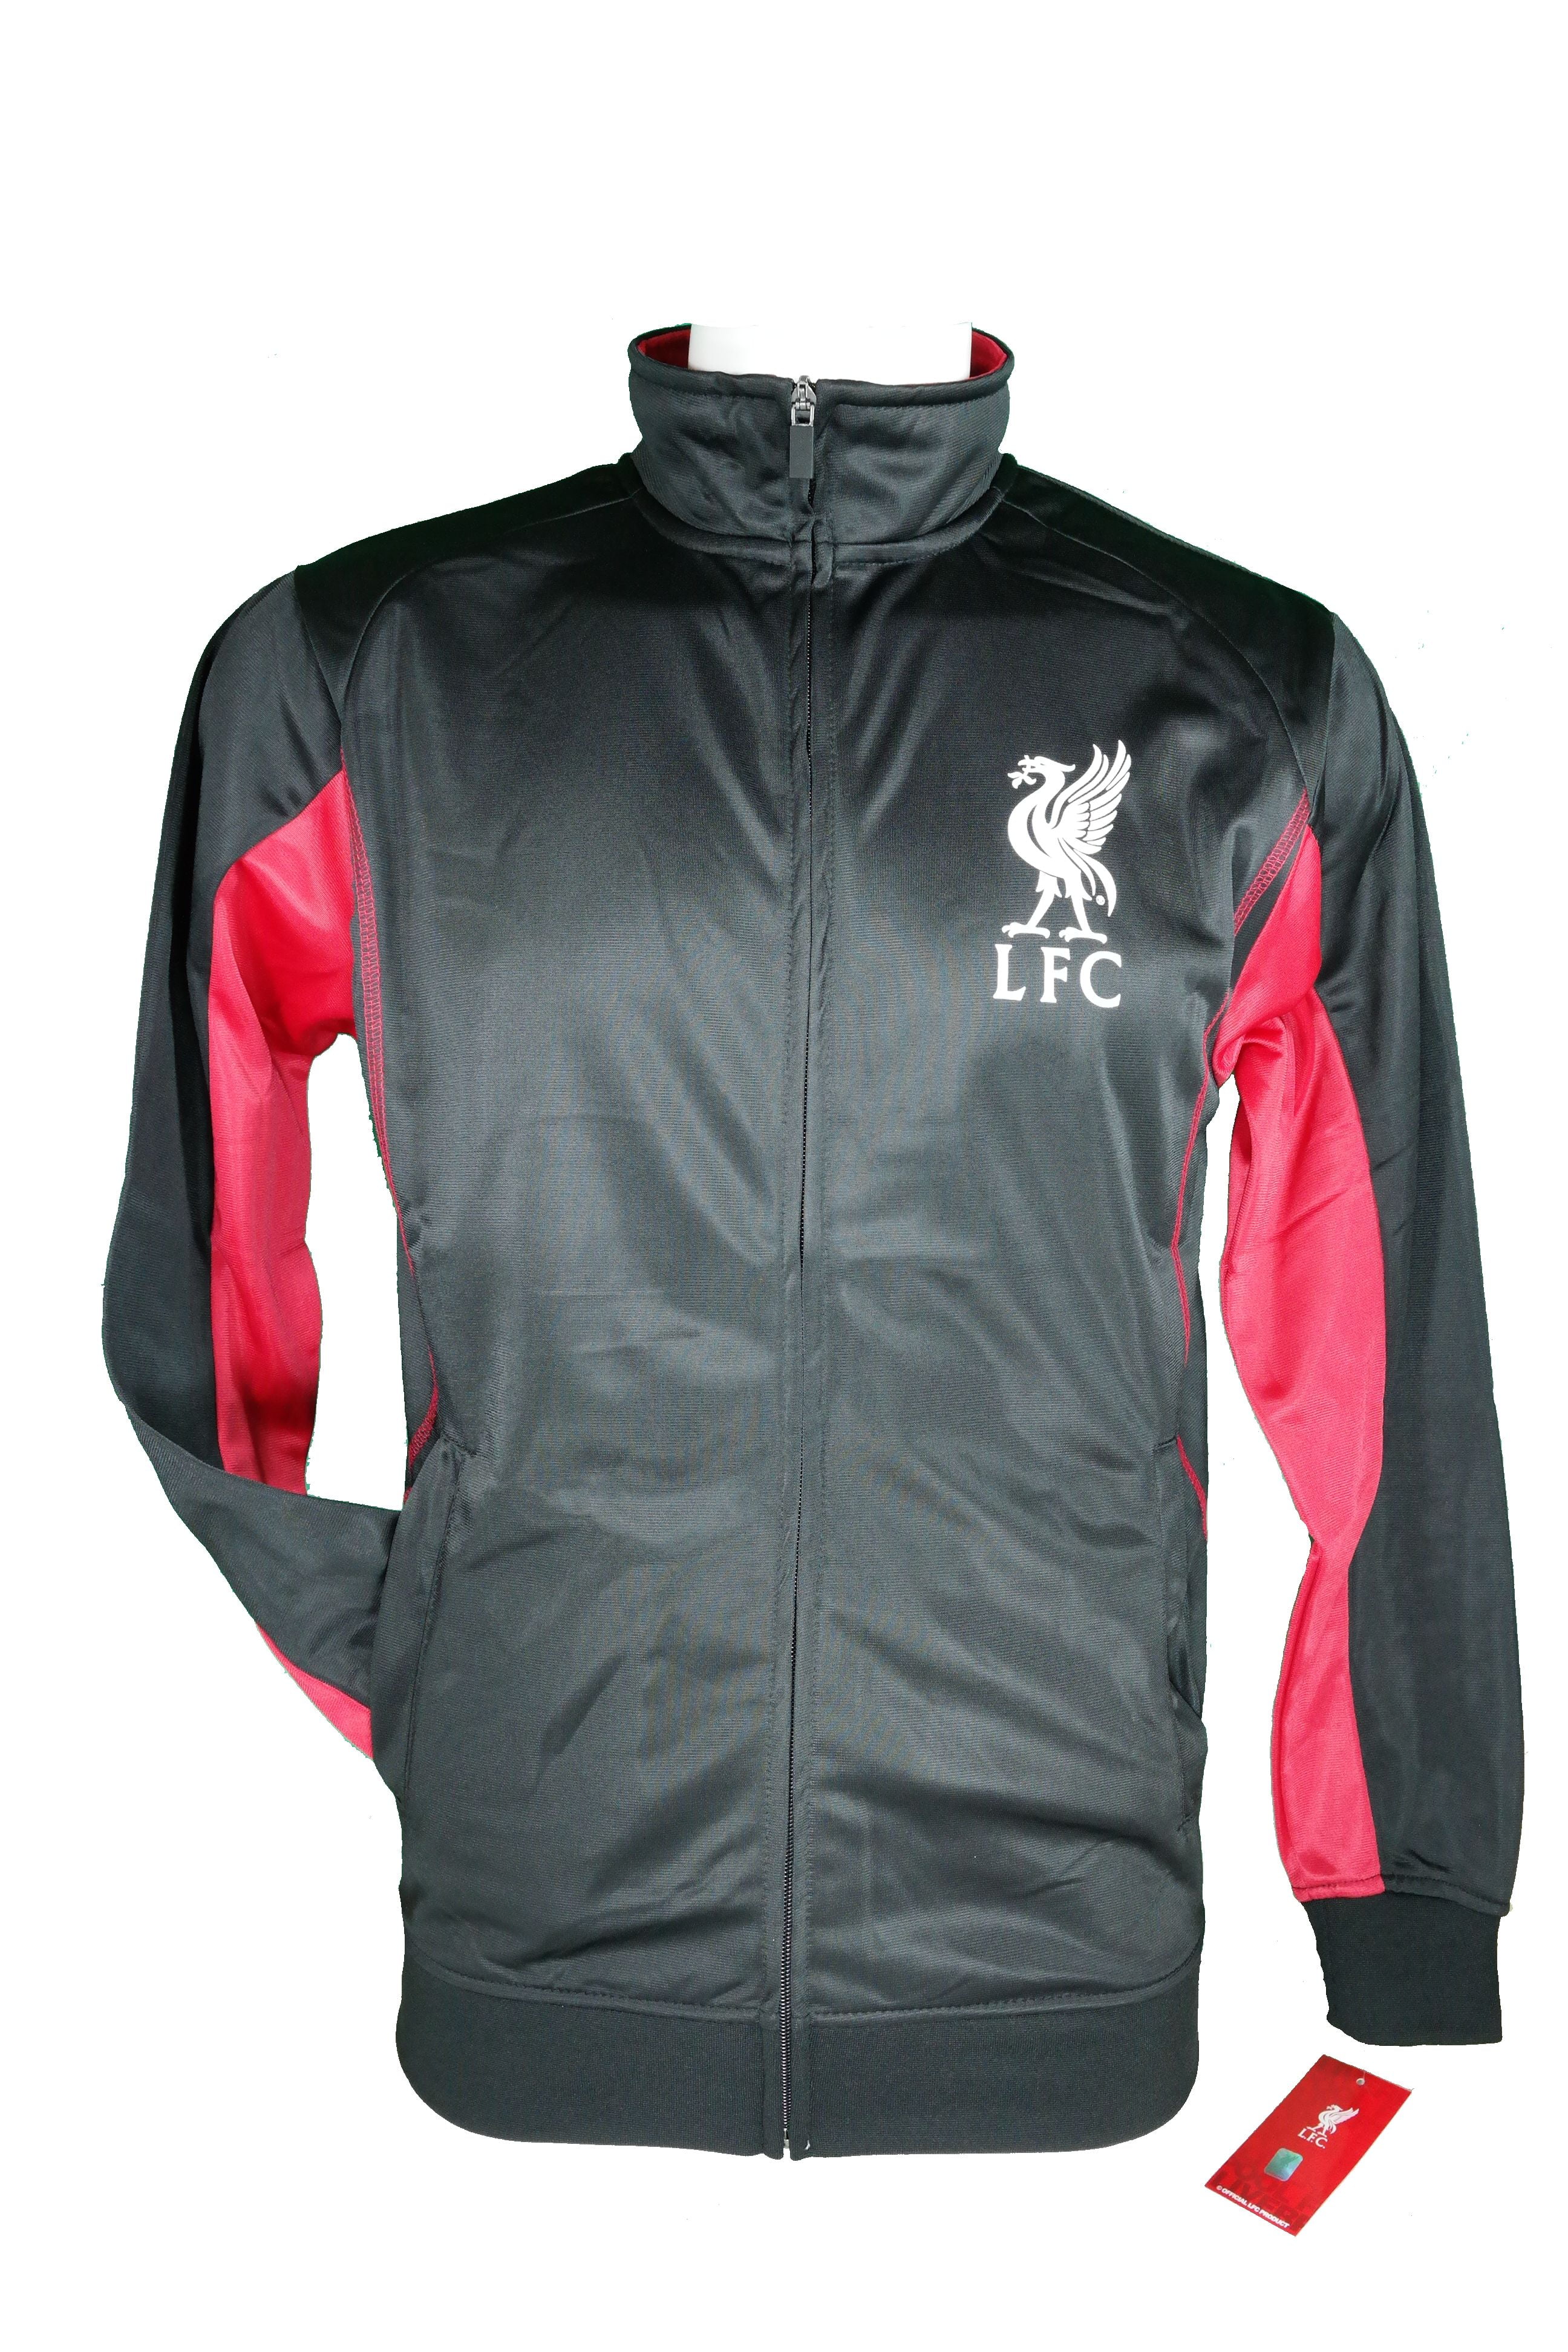 Isport Liverpool Fc Jacket Track Soccer Adult Sizes Soccer Football Official Merchandise 